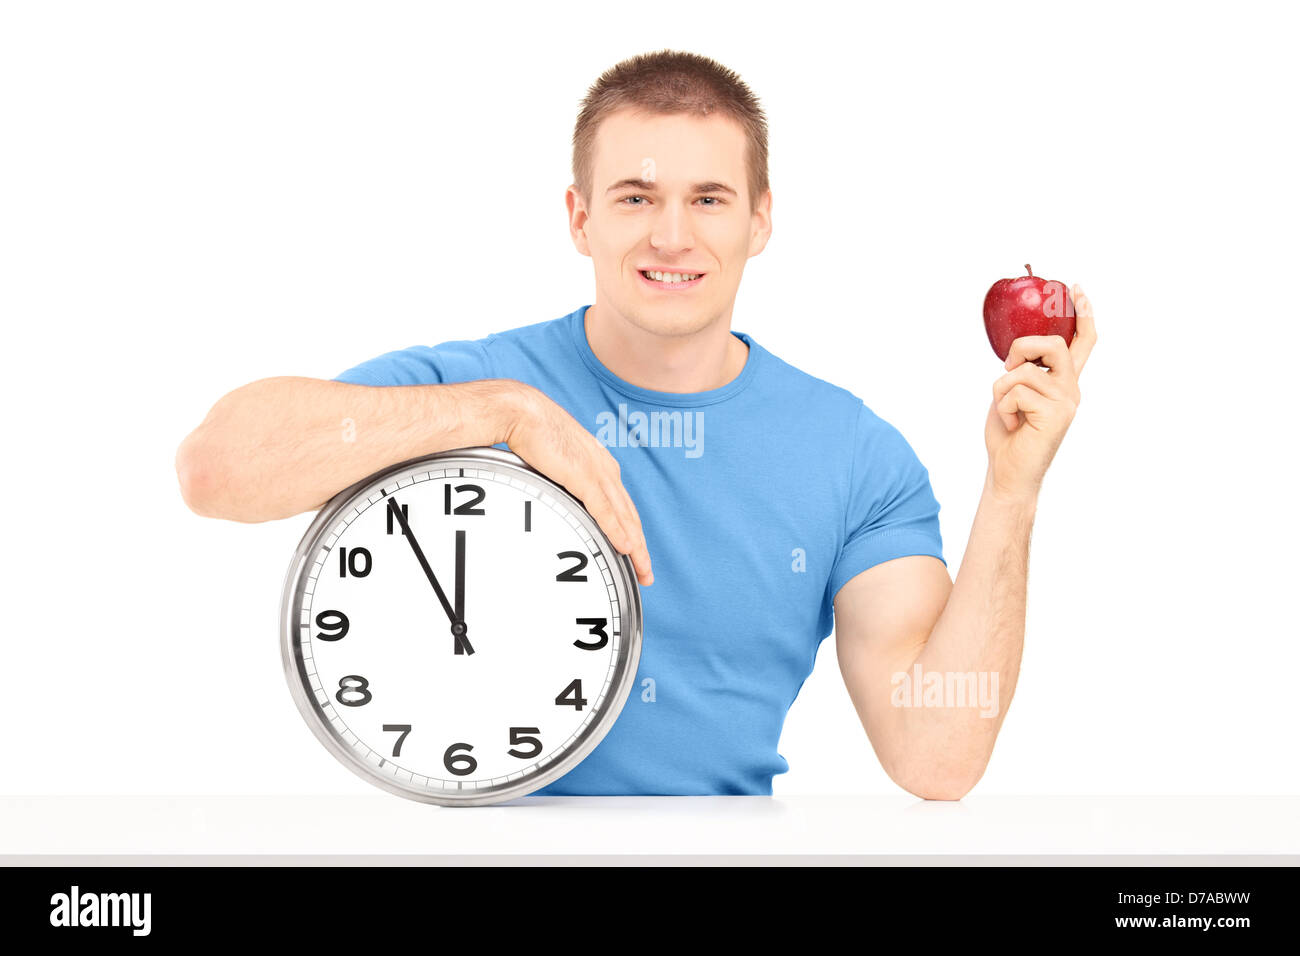 A smiling guy holding a wall clock and red apple on a table isolated on white background Stock Photo